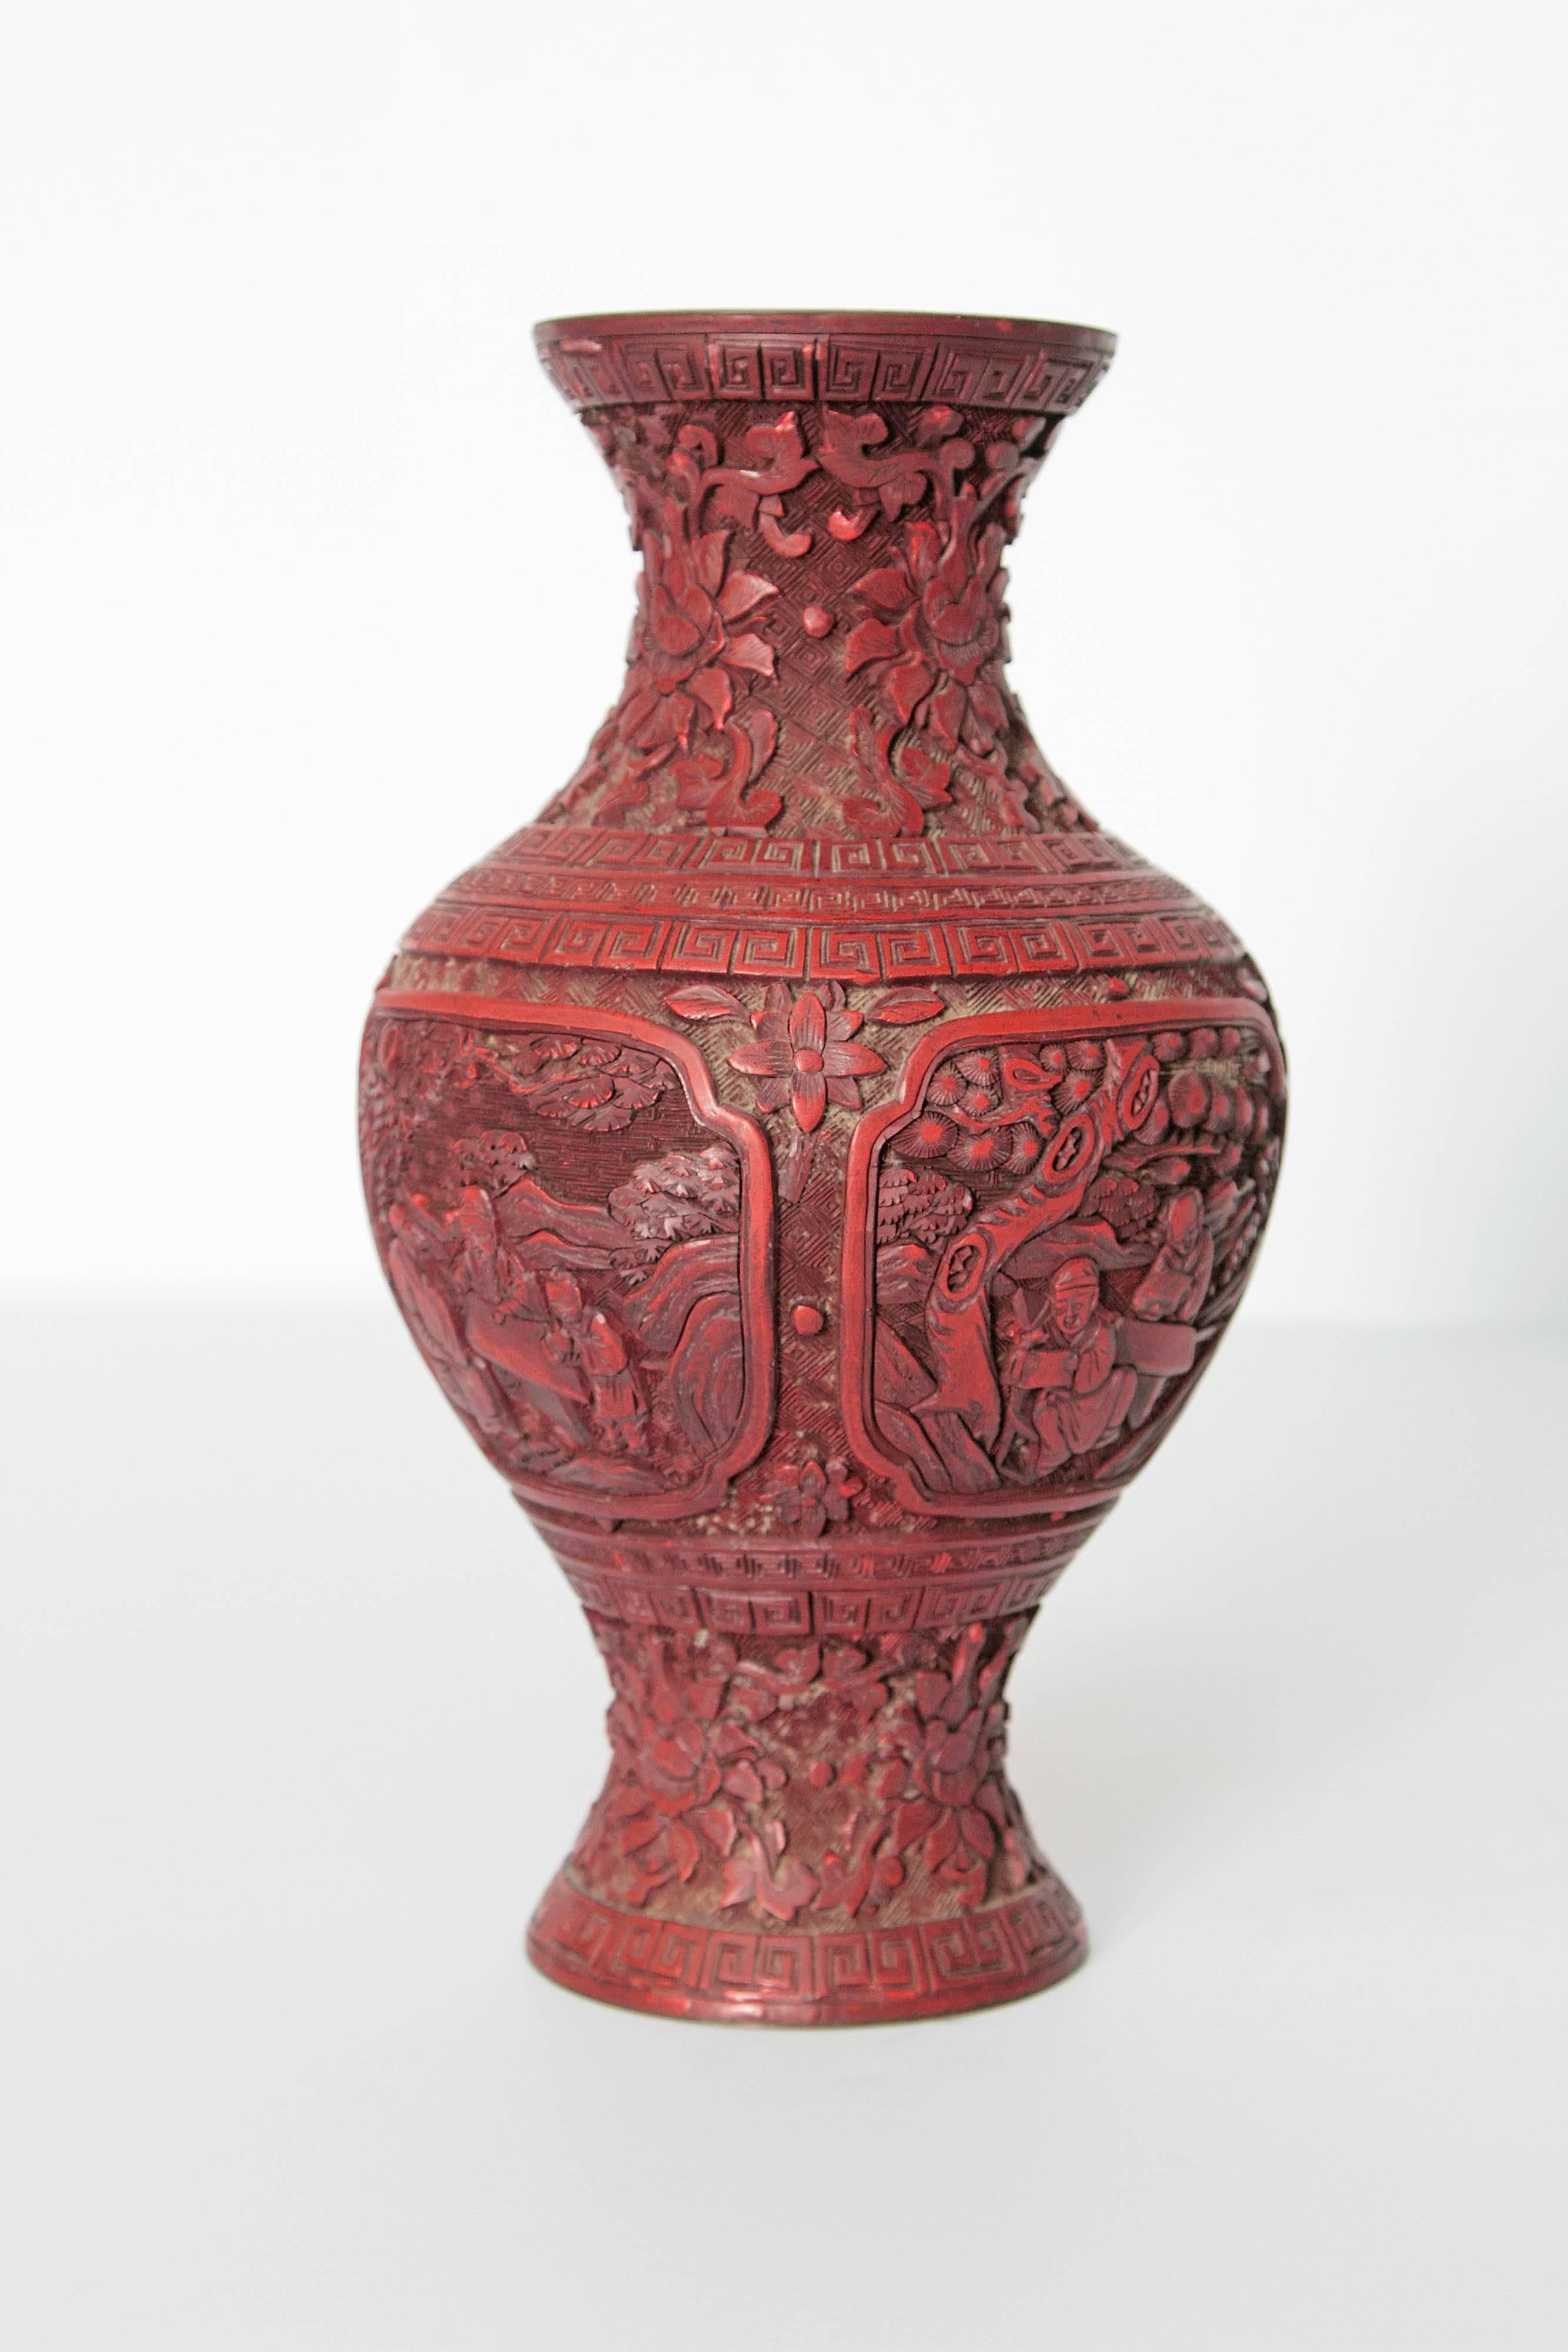 A Chinese lacquer cinnabar vase. Panels with people, Greek key design and floral carvings.